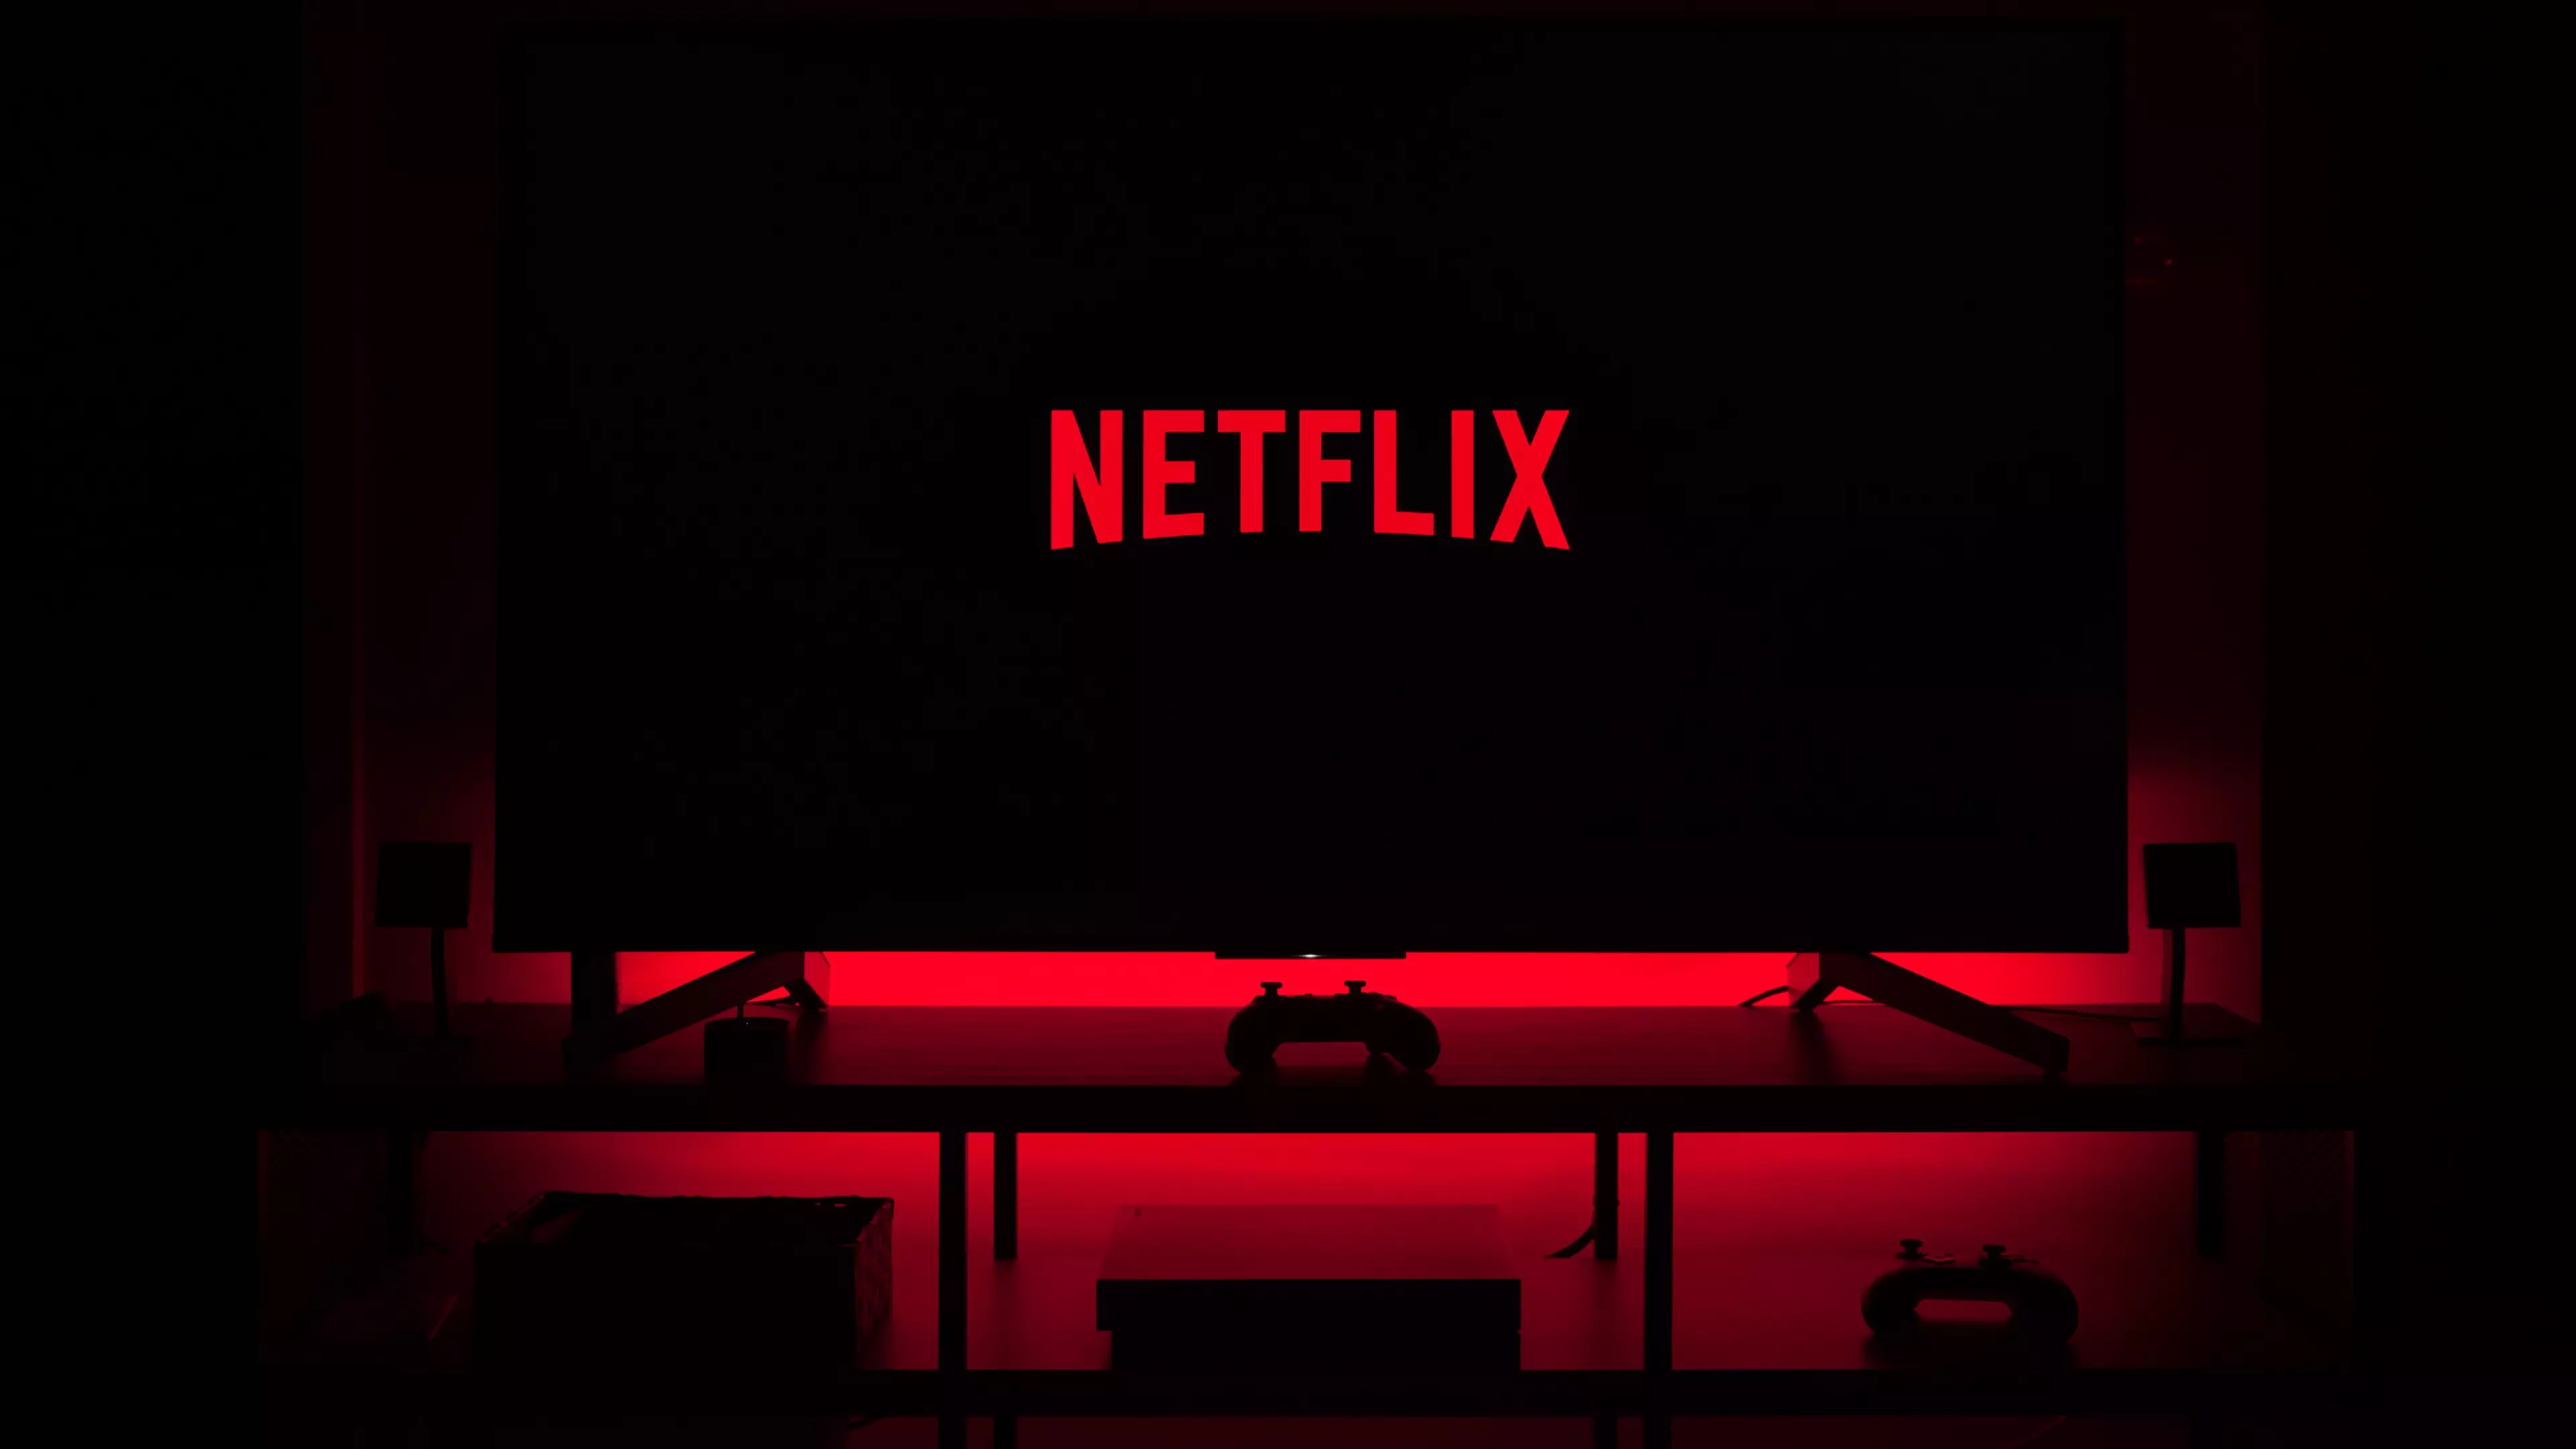 Netflix Looking For Irish People In 'Largest Reality Casting Call' Ever